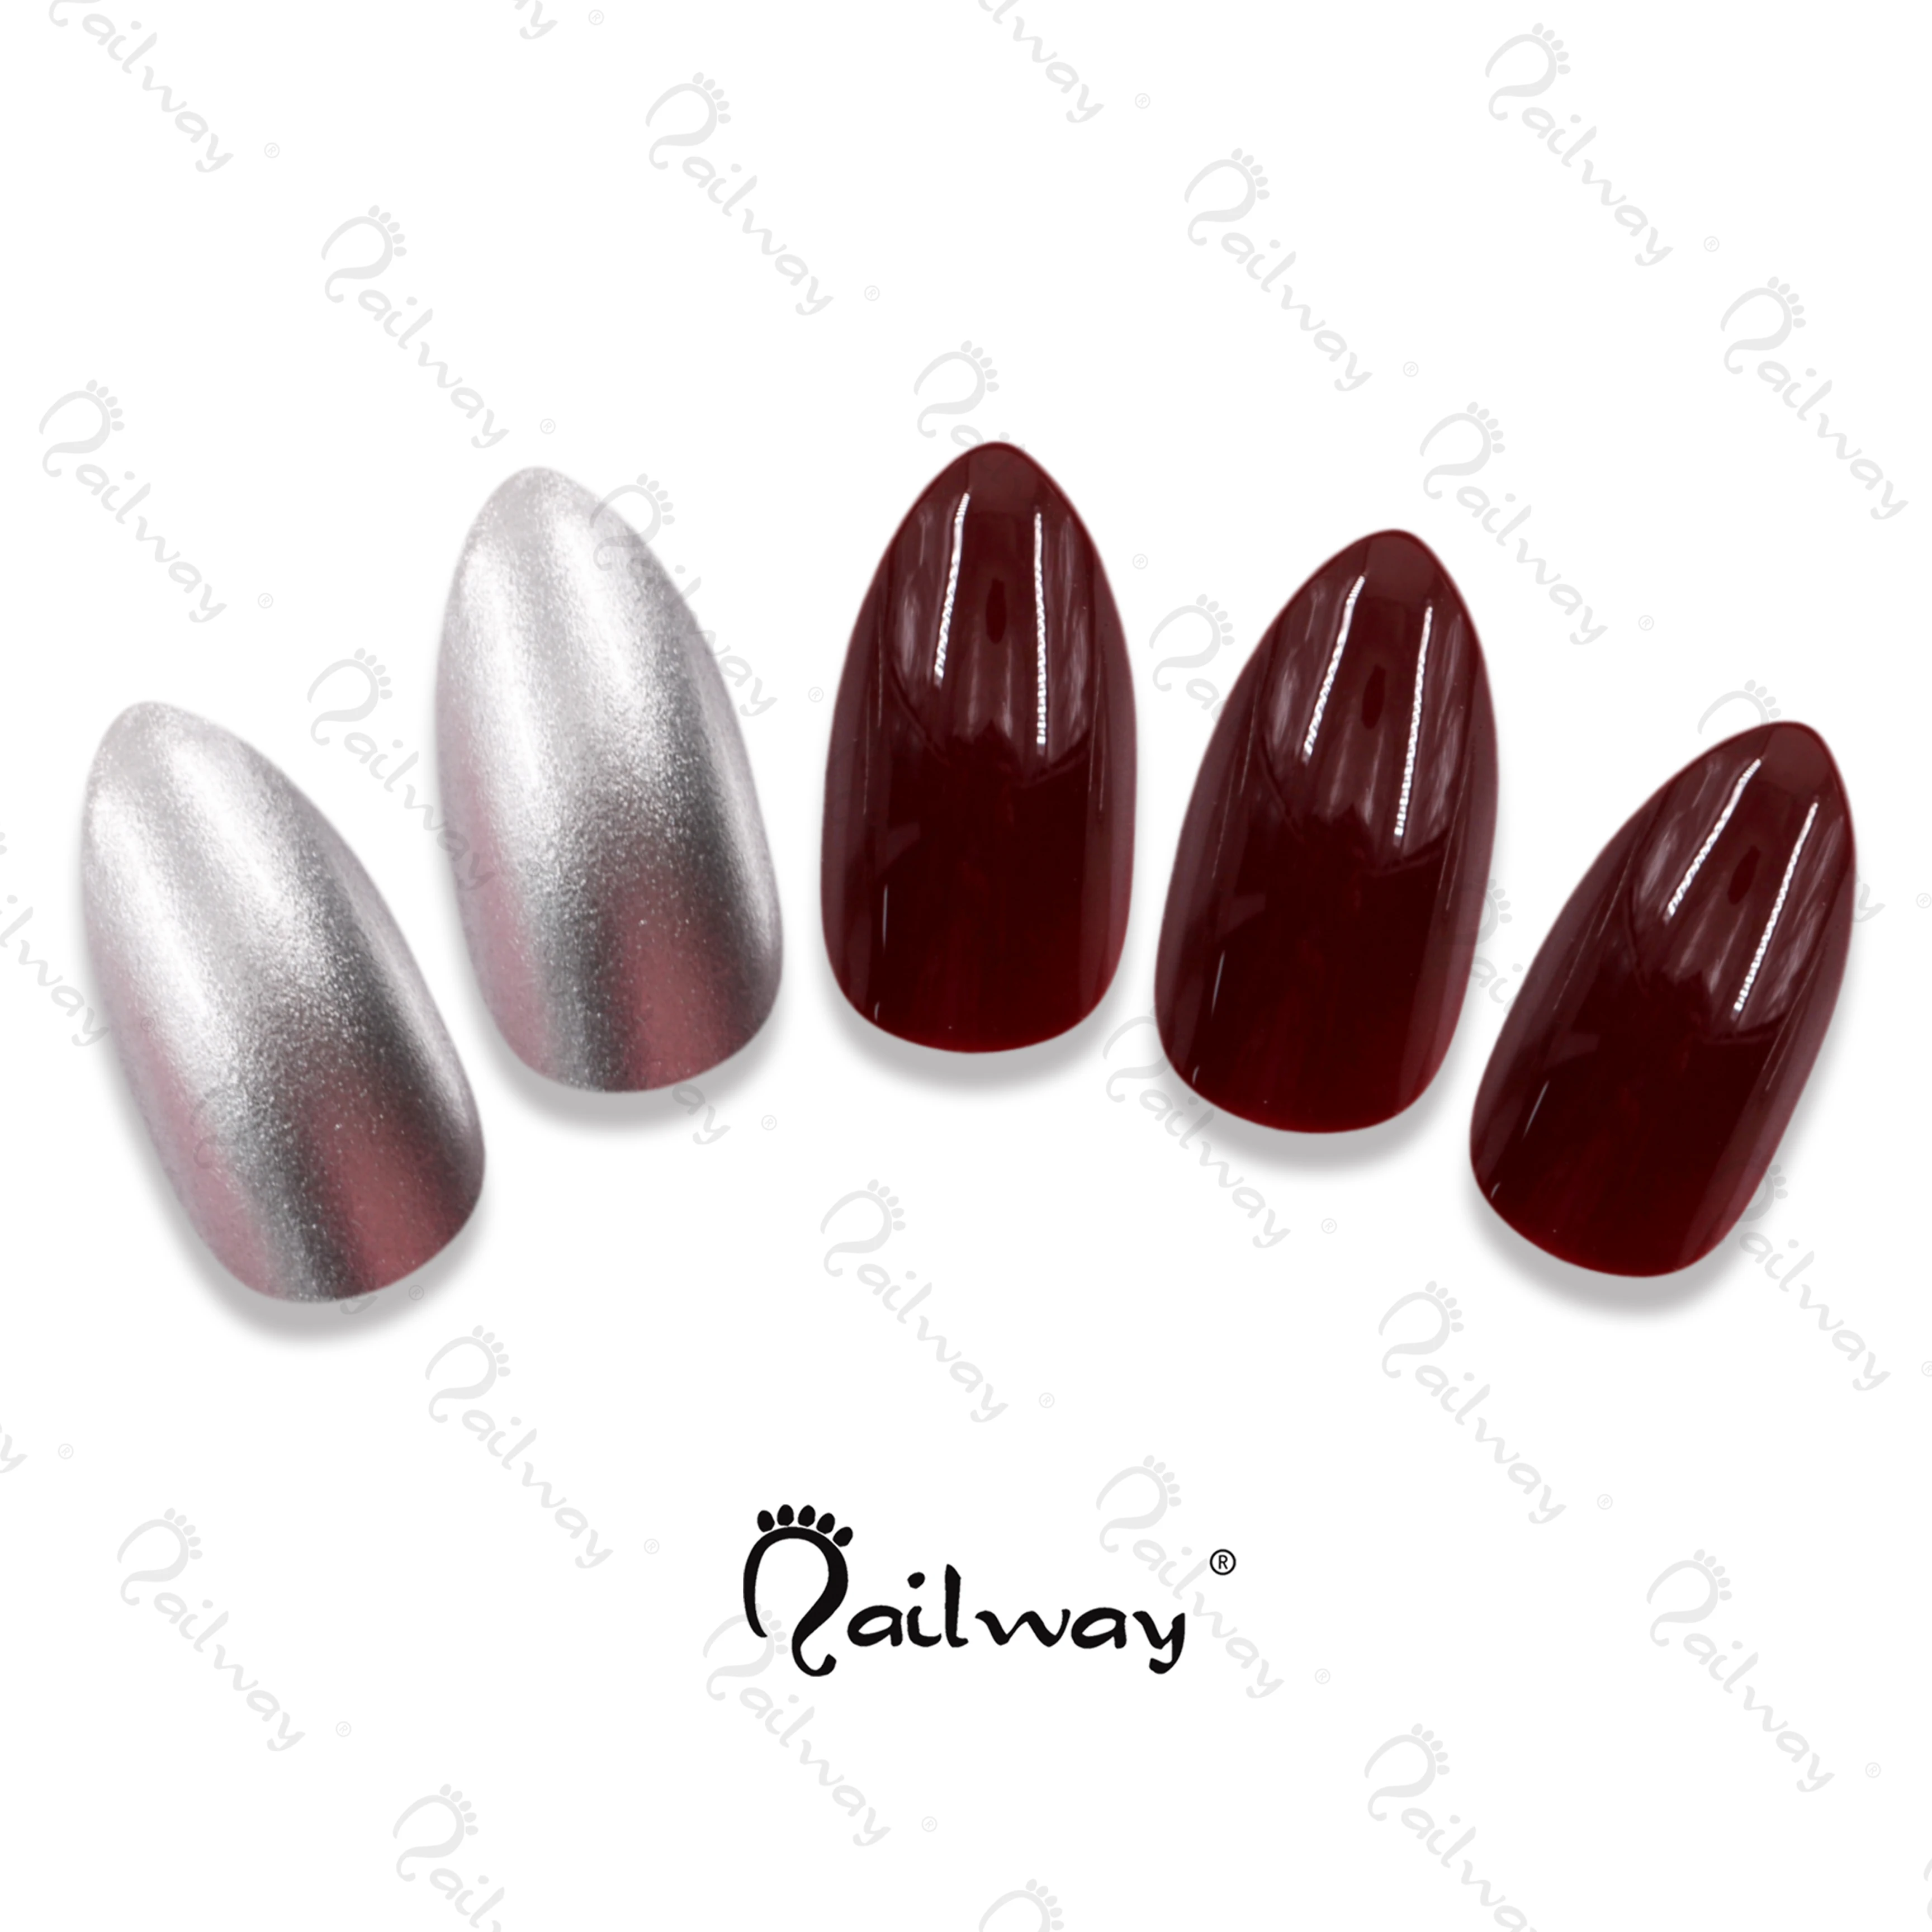 

Wholesale Hot 24pcs/Set Silvery & Wine Red Stiletto Nail Tips Almond Pointed Artificial Nails Full Cover Art Nails With Glue